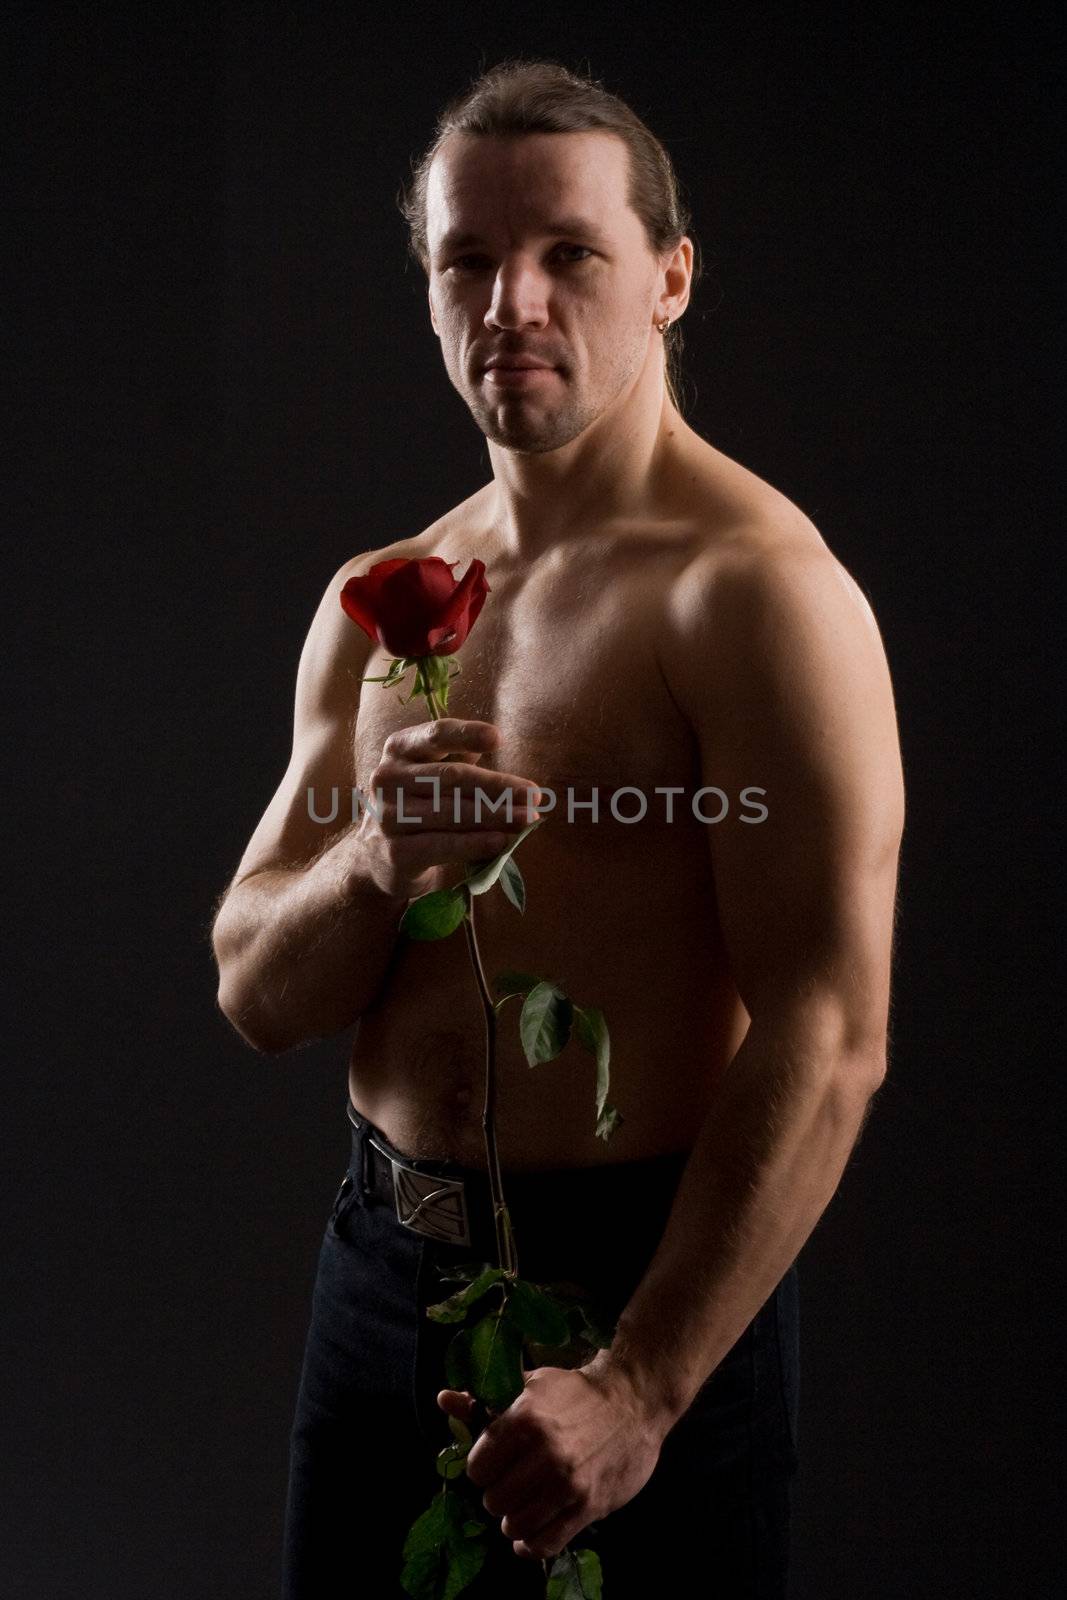 standing romantic man with red rose
